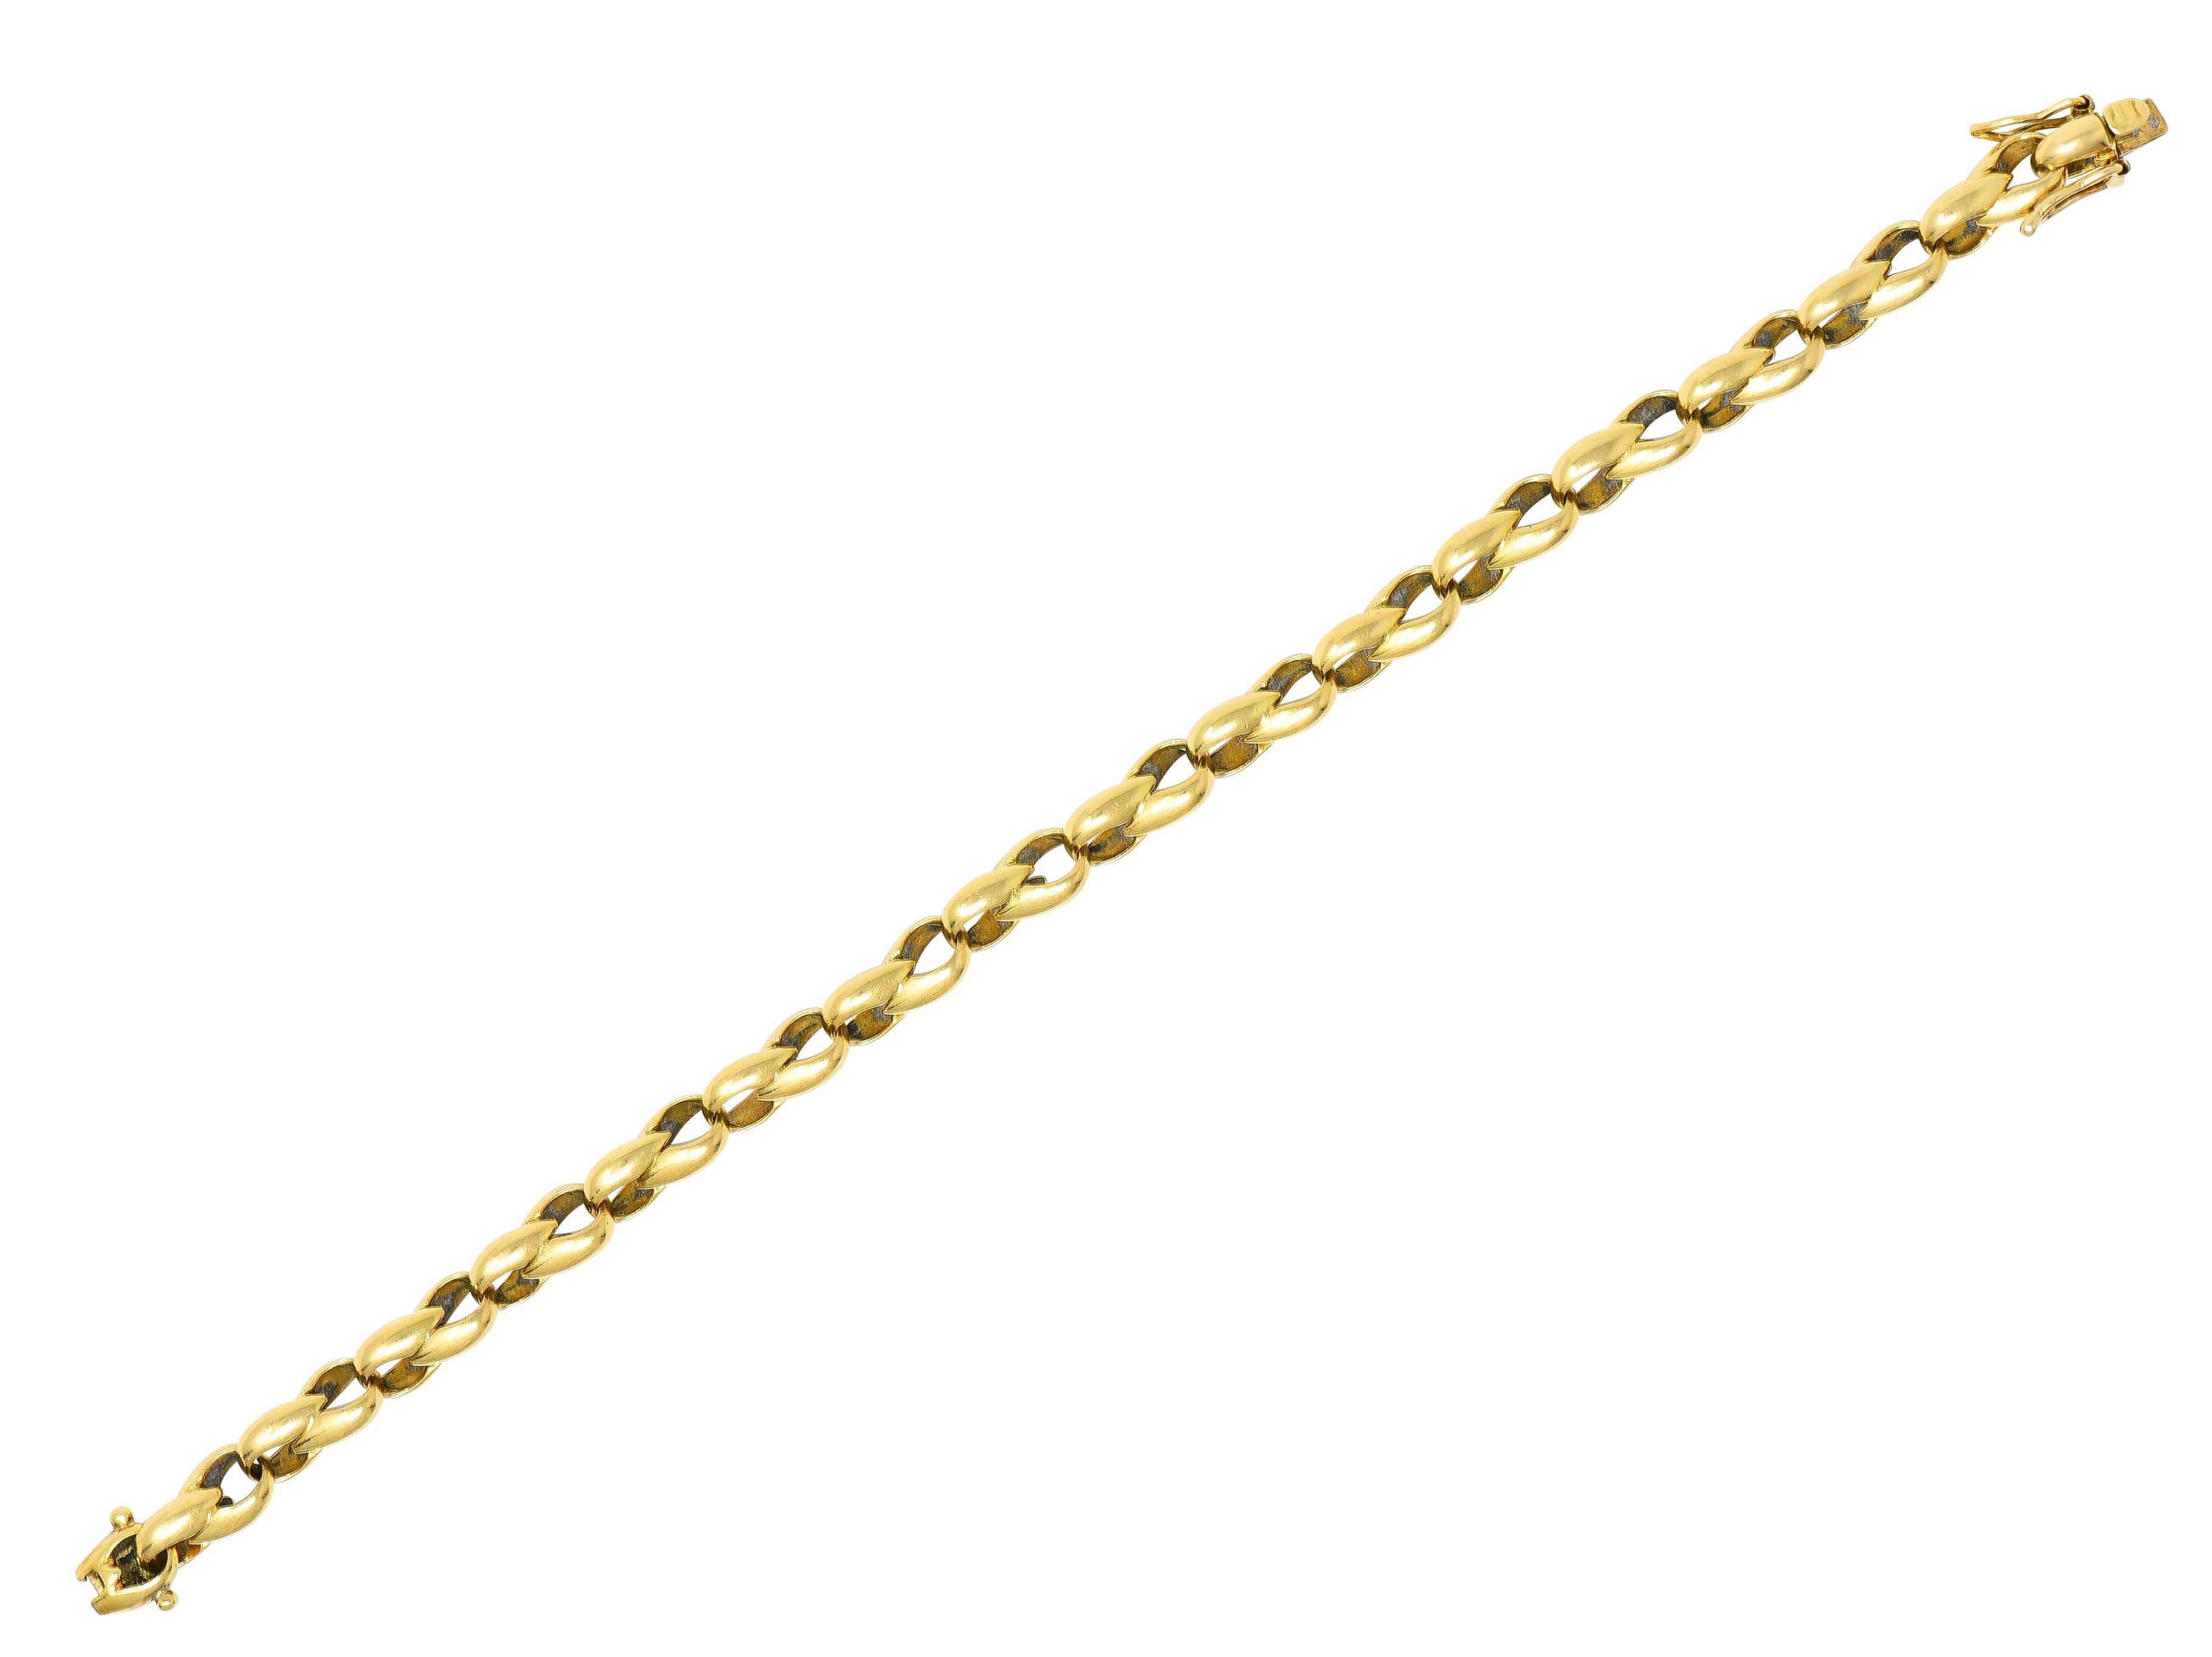 Designed as an infinity link chain 
With solid faceted pear links 
Completed by concealed clasp closure 
With hinged double figure eight safety 
Stamped with French hallmarks for 18 karat gold
Numbered and fully signed for Cartier
Circa: 1991; via